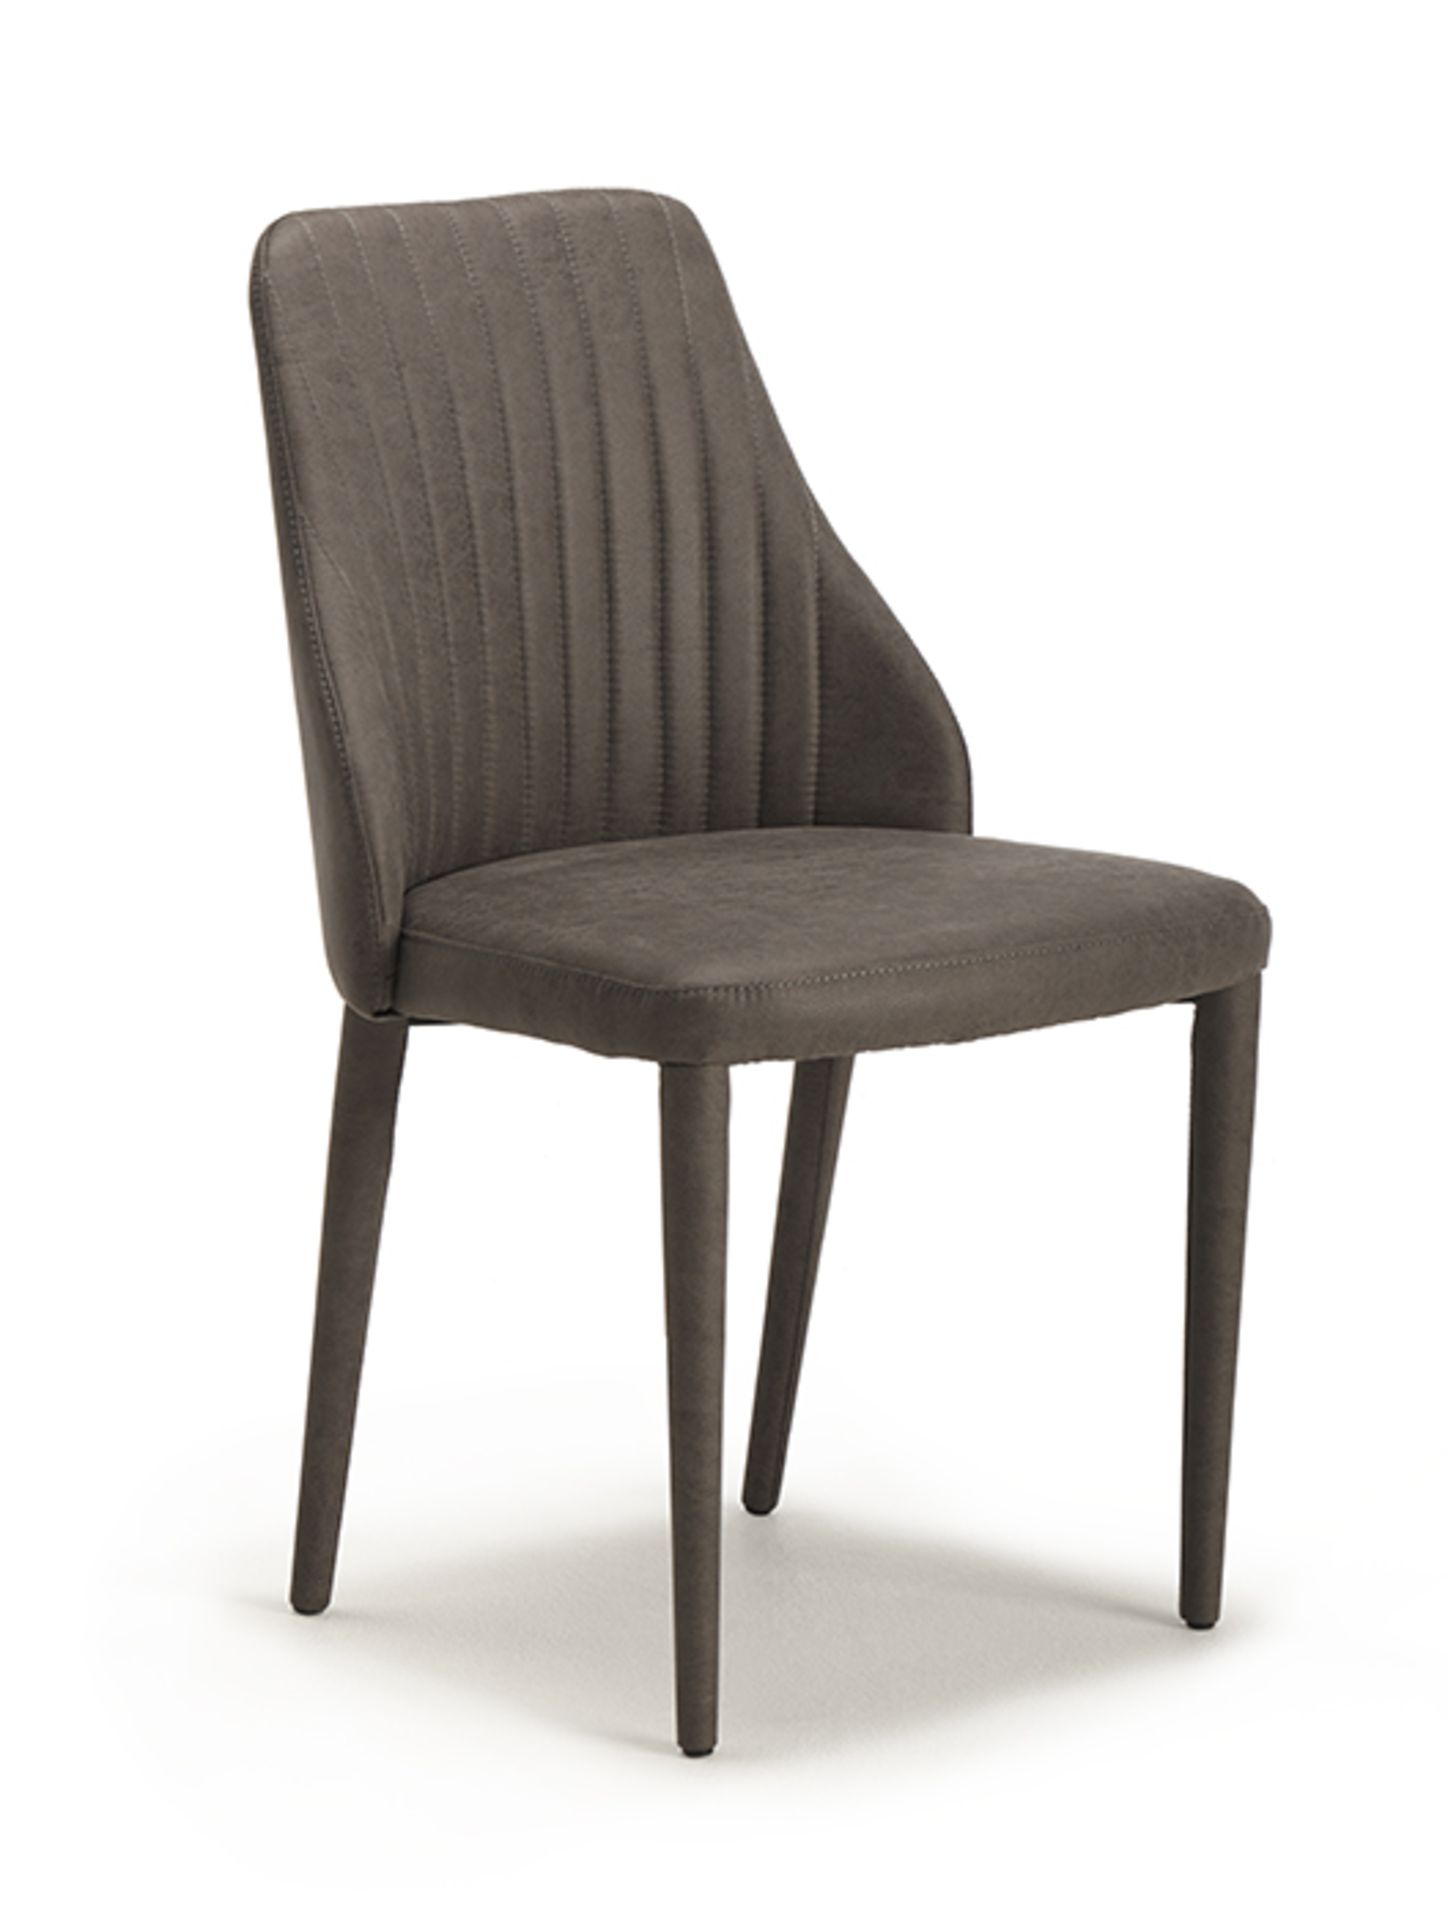 A set of 6 x Lundy Chairs by Kesterport The Lundy Chair is fully upholstered in our popular dark - Bild 6 aus 6